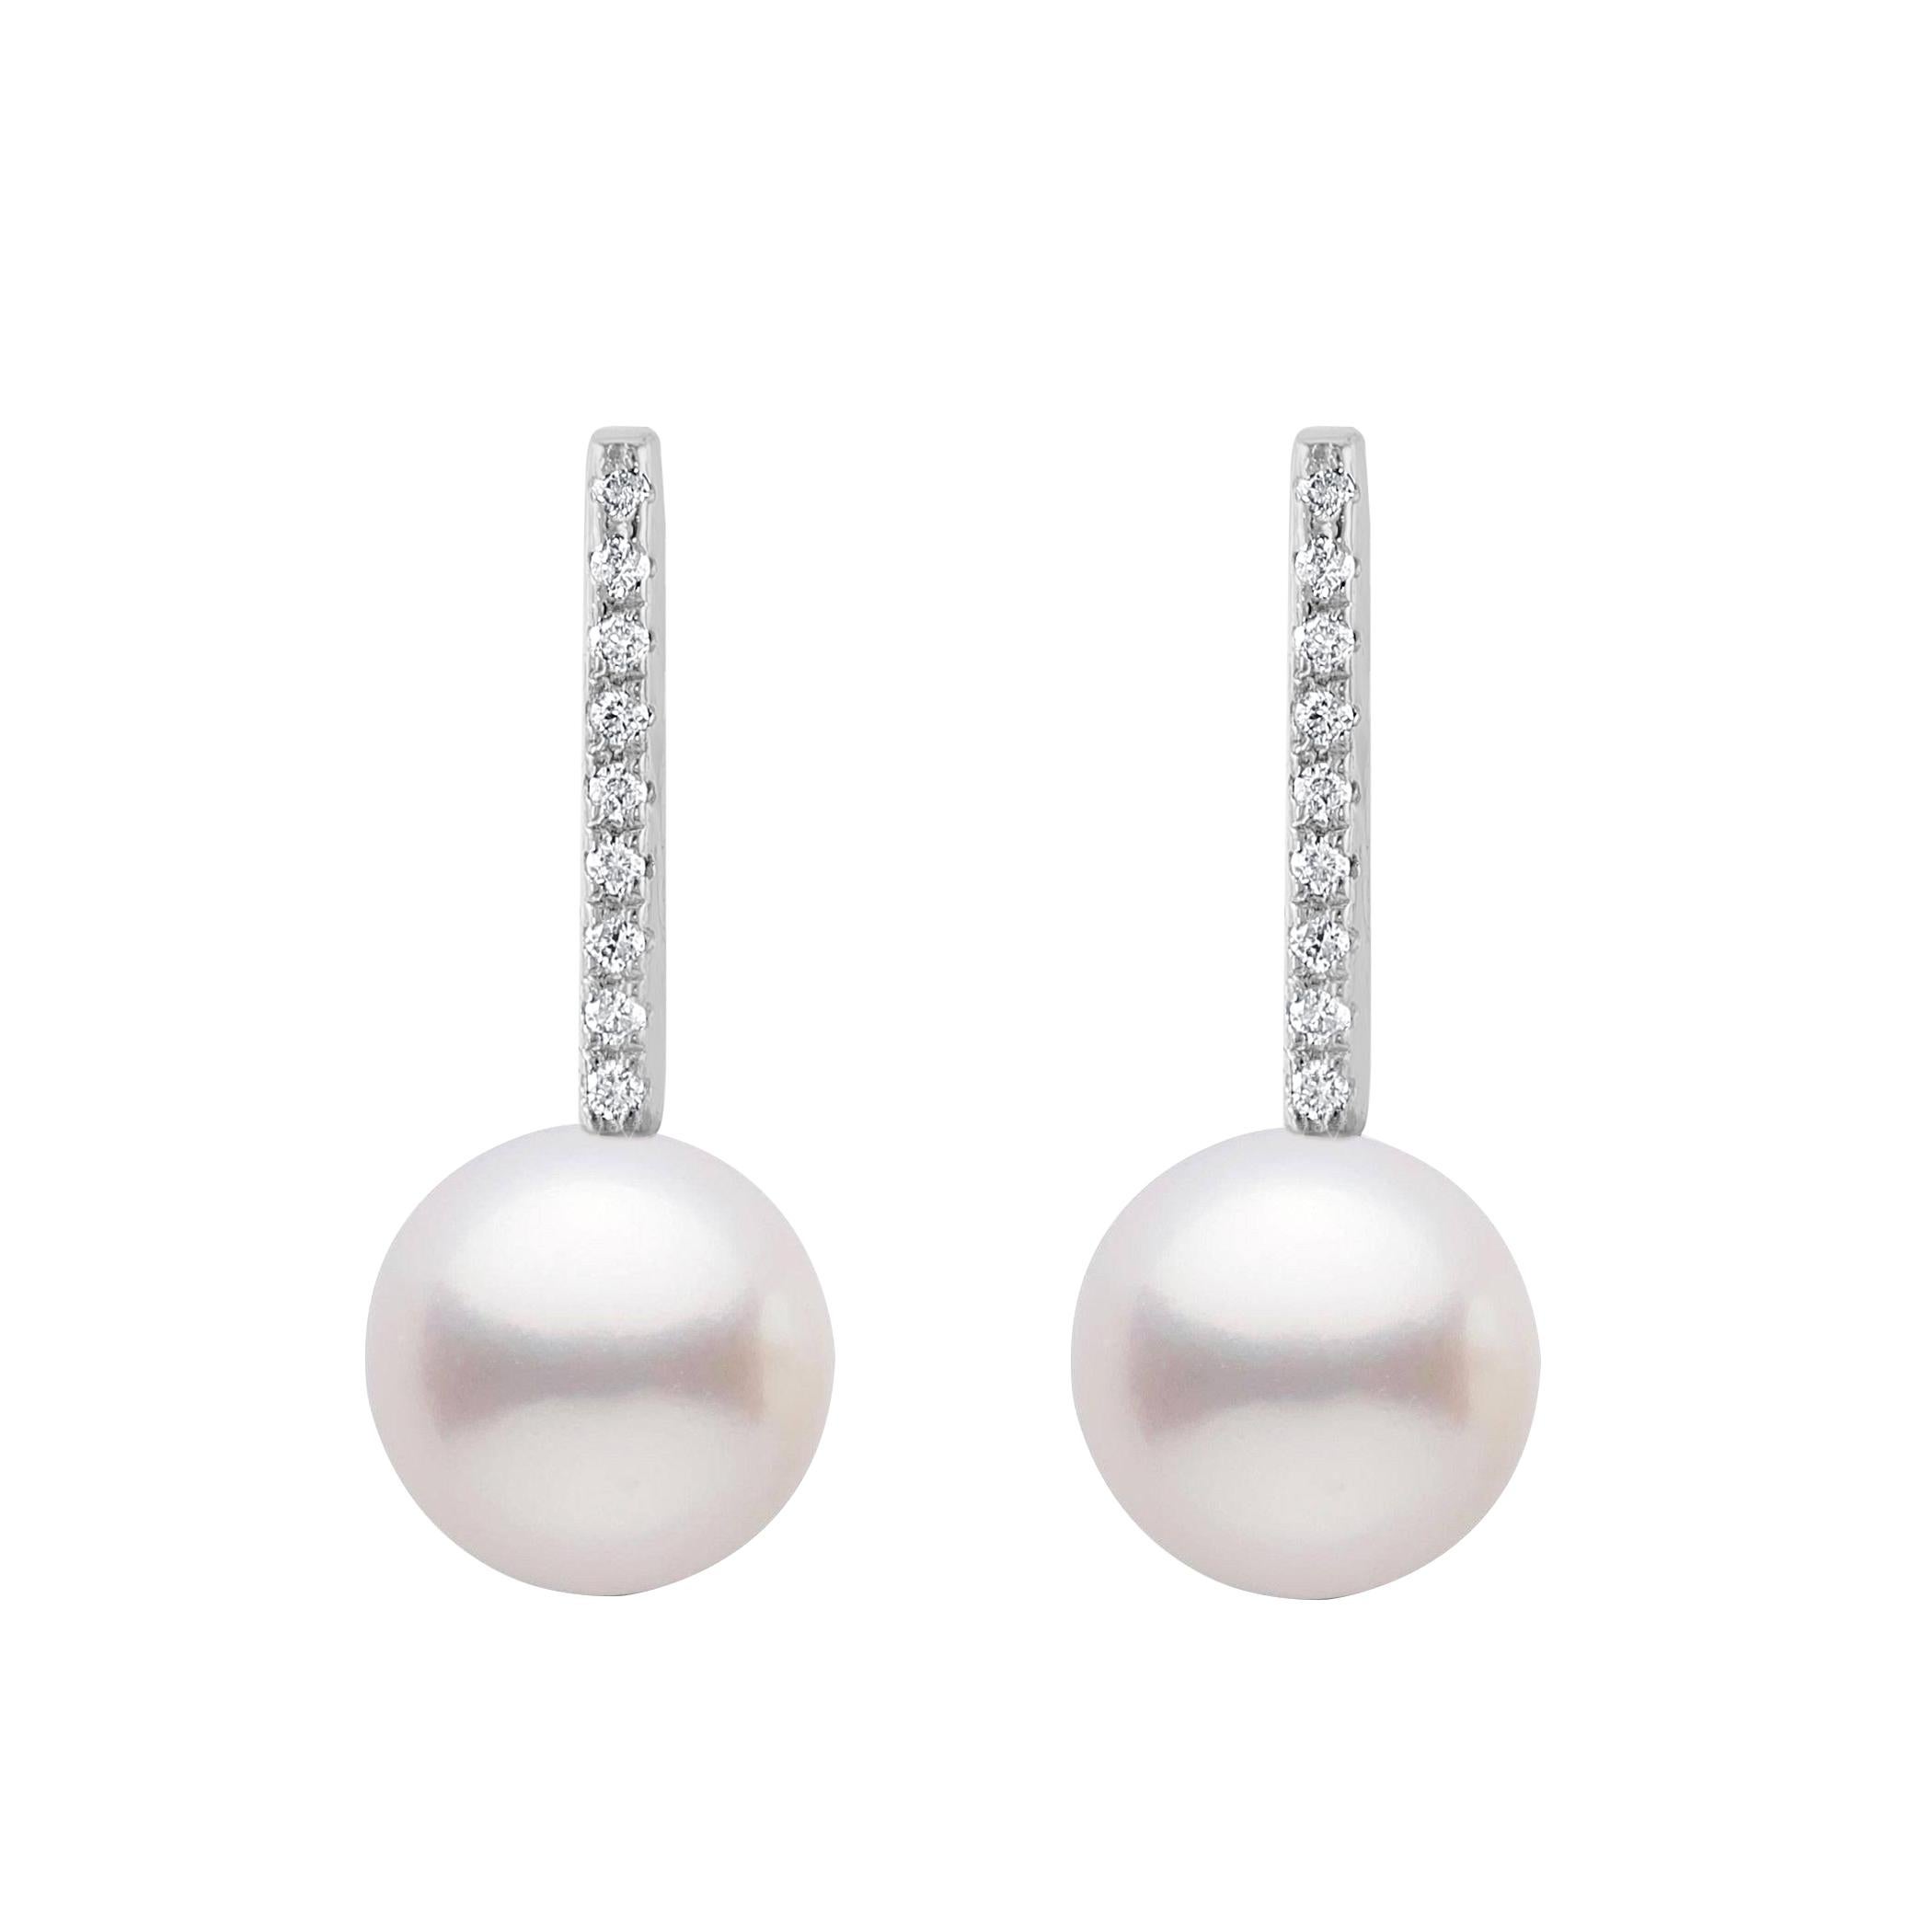 The bar earrings feature 14k White Gold, diamonds and Akoya pearls measuring 7.5mm. These are elegant and easy to wear, guaranteed to add glam to your look. 